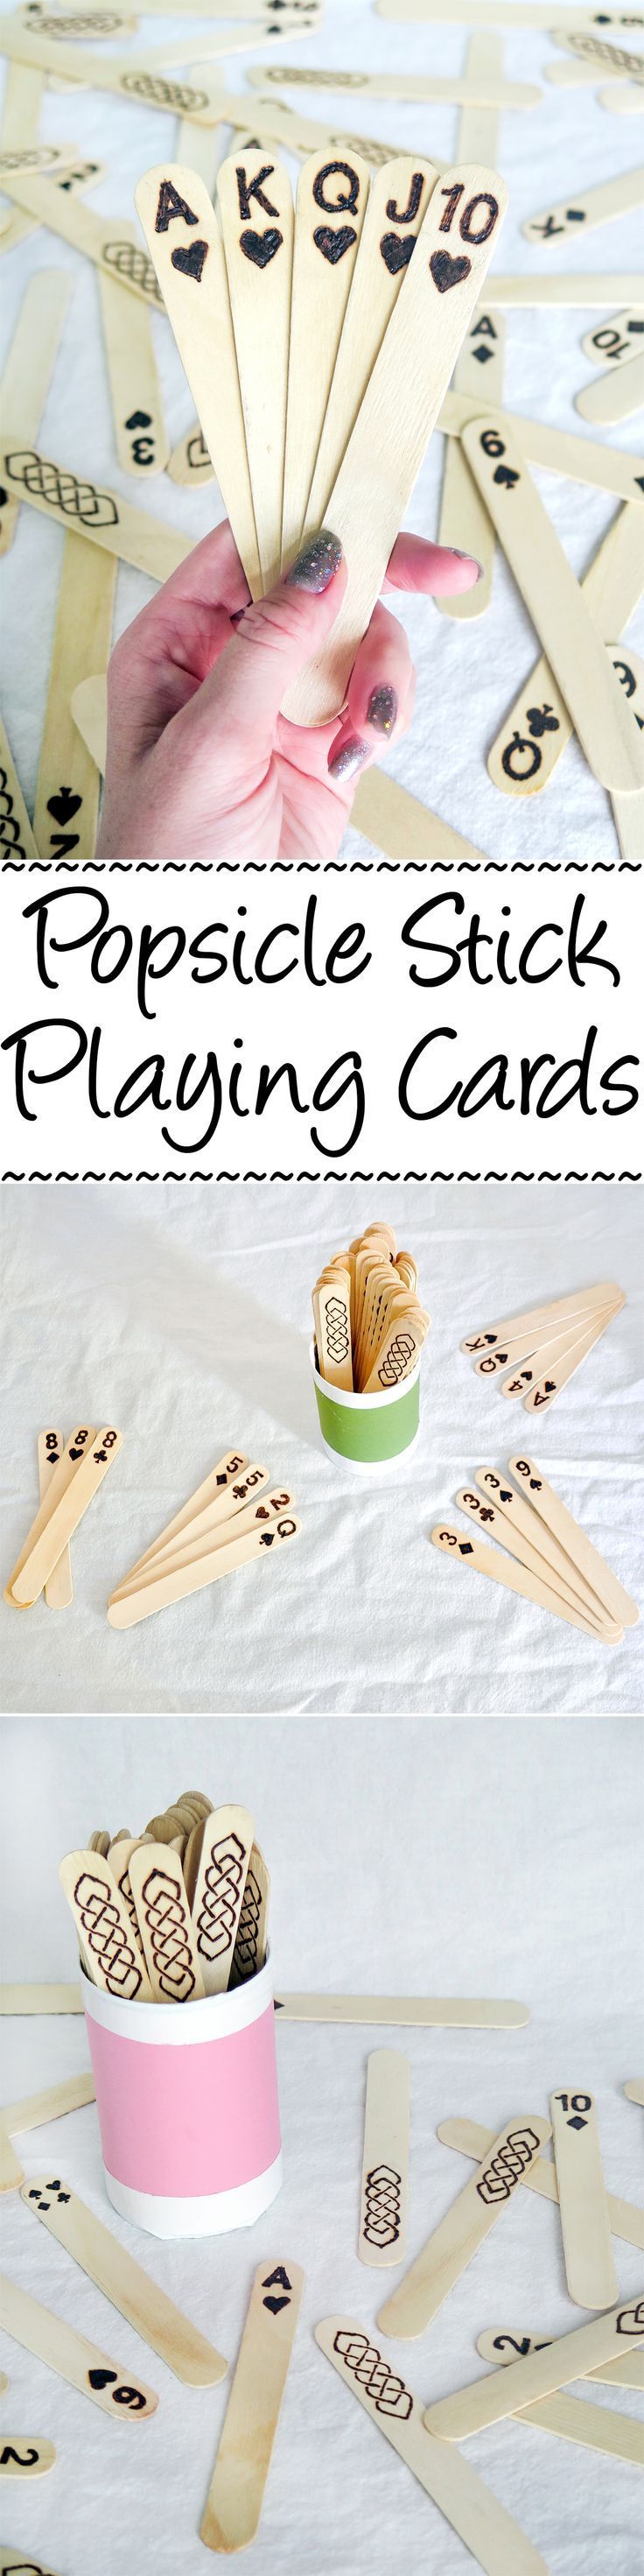 Jumbo popsicle sticks + wood burning = a fun & unique set of playing cards!